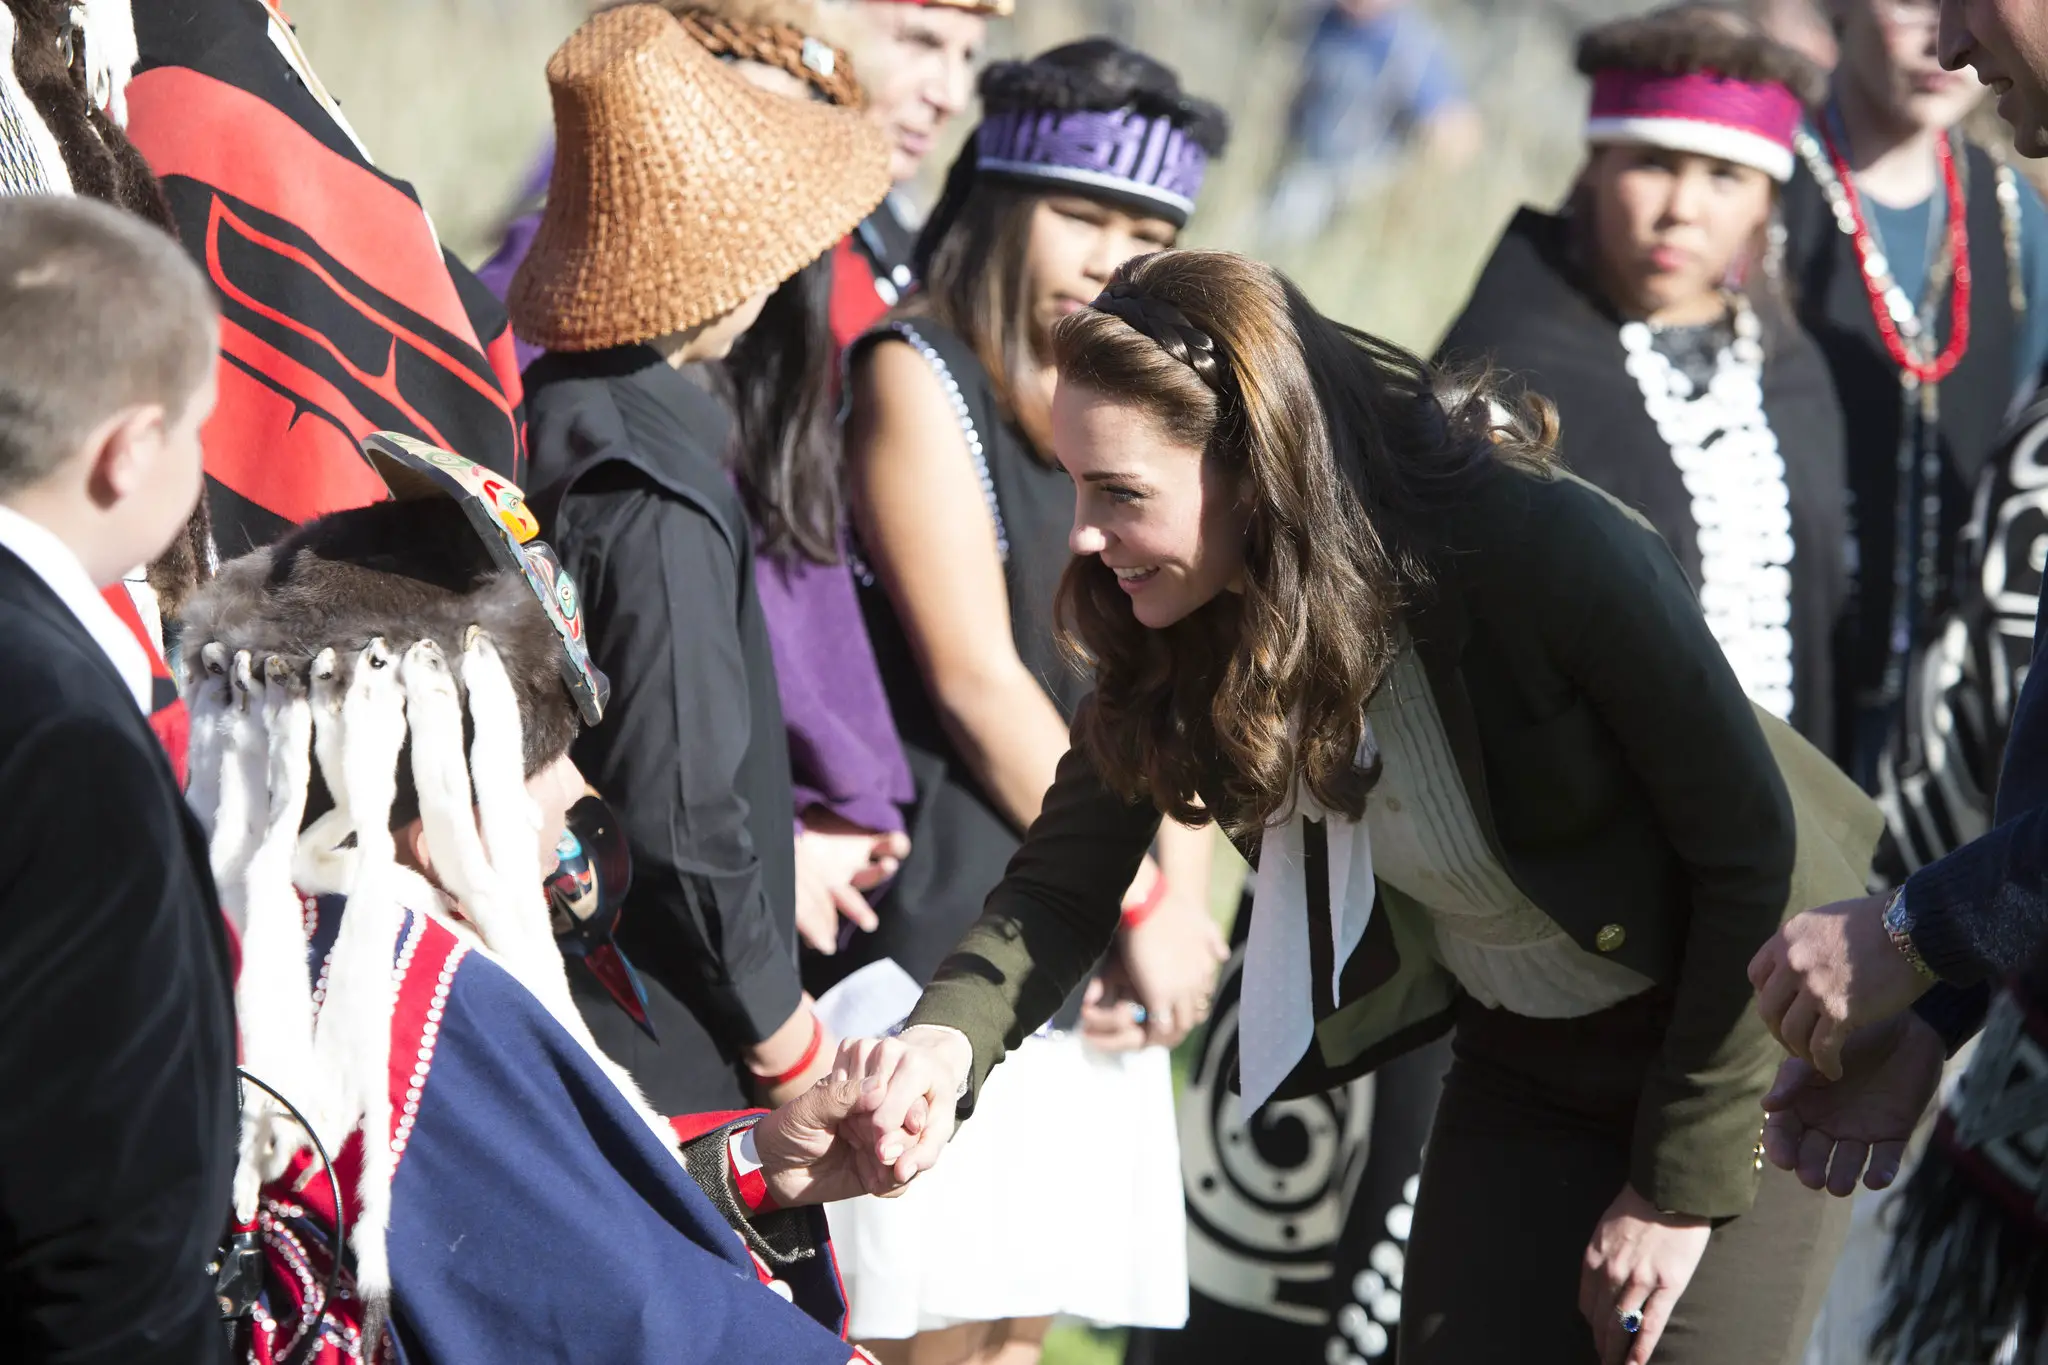 The Duchess of cambridge met with some members of the public in Haida Gwaii